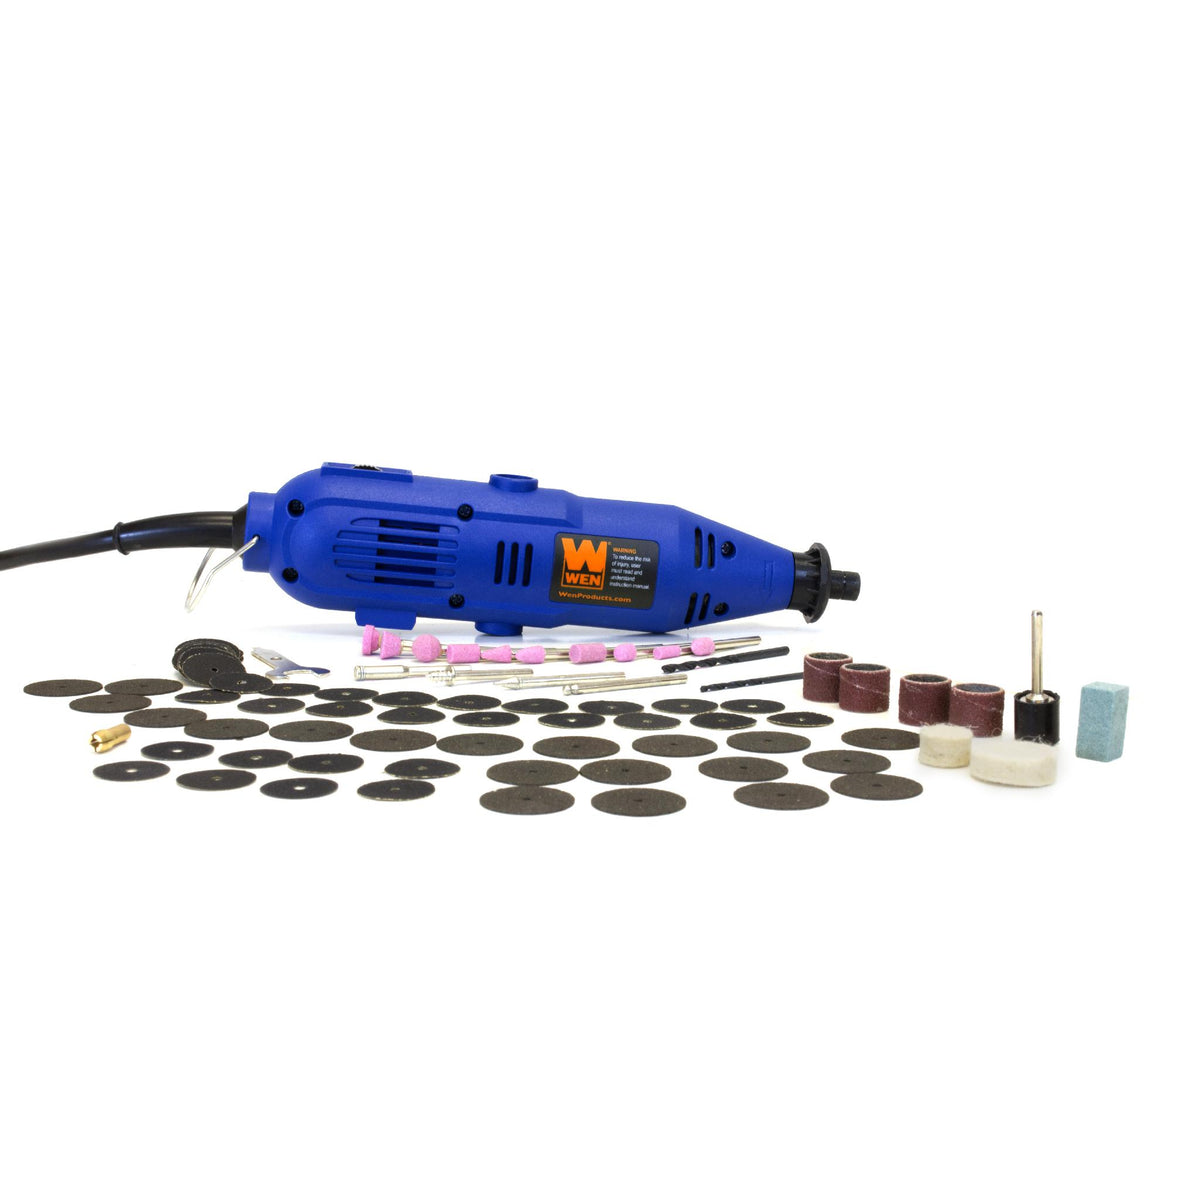 Dremel 100-N/6 Single Speed Rotary Tool Kit with 6 Accessories 